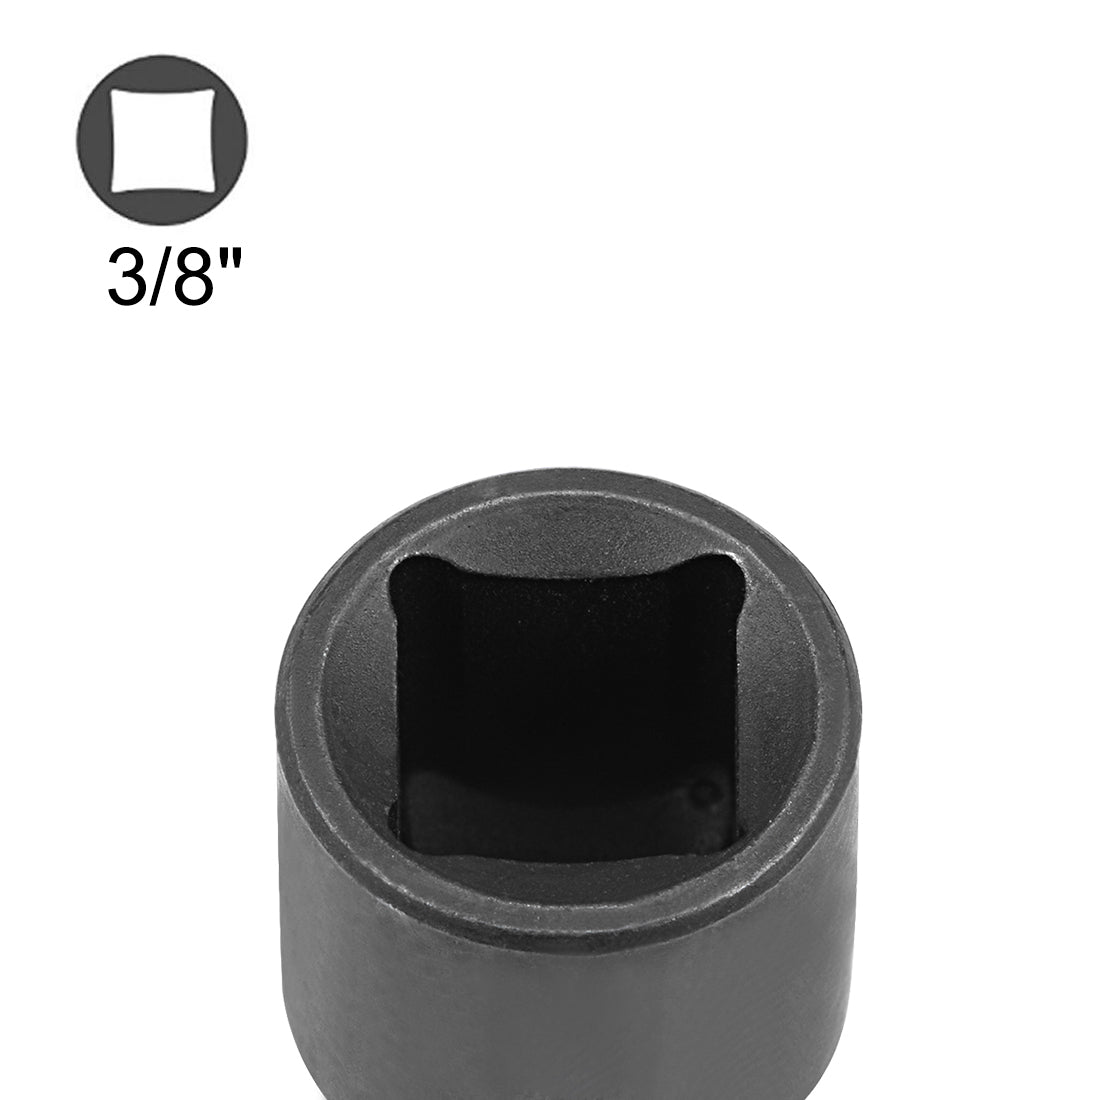 uxcell Uxcell 2 Pcs 3/8 Inch Drive (F) x 1/4 Inch (M) Socket Reducer, Female to Male, Cr-V (Black)